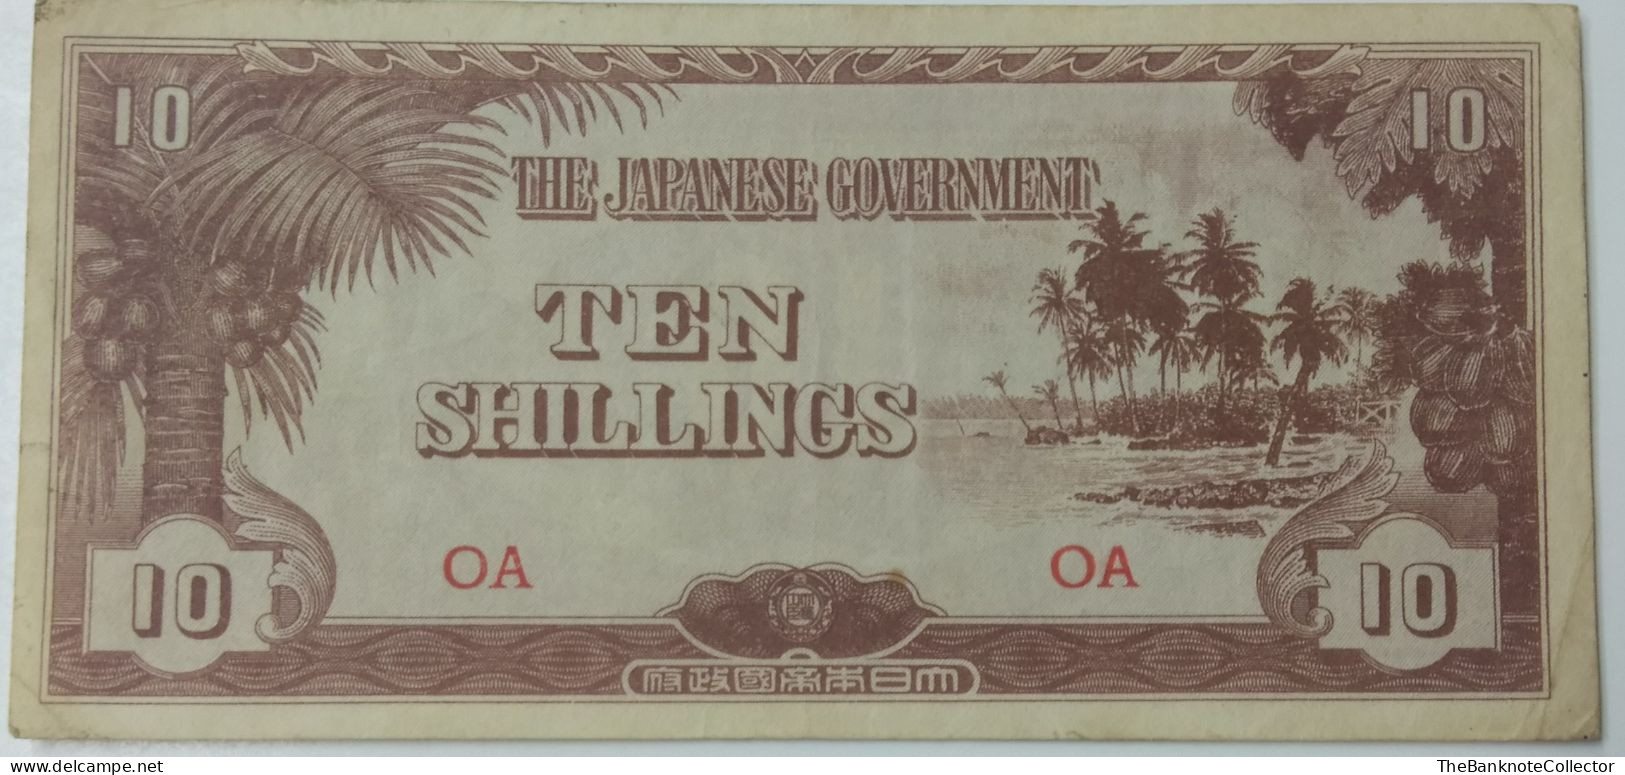 Japan Government Occupation JIM Oceania 10 Shillings WWII ND 1942 P-3  VF+ - Japon